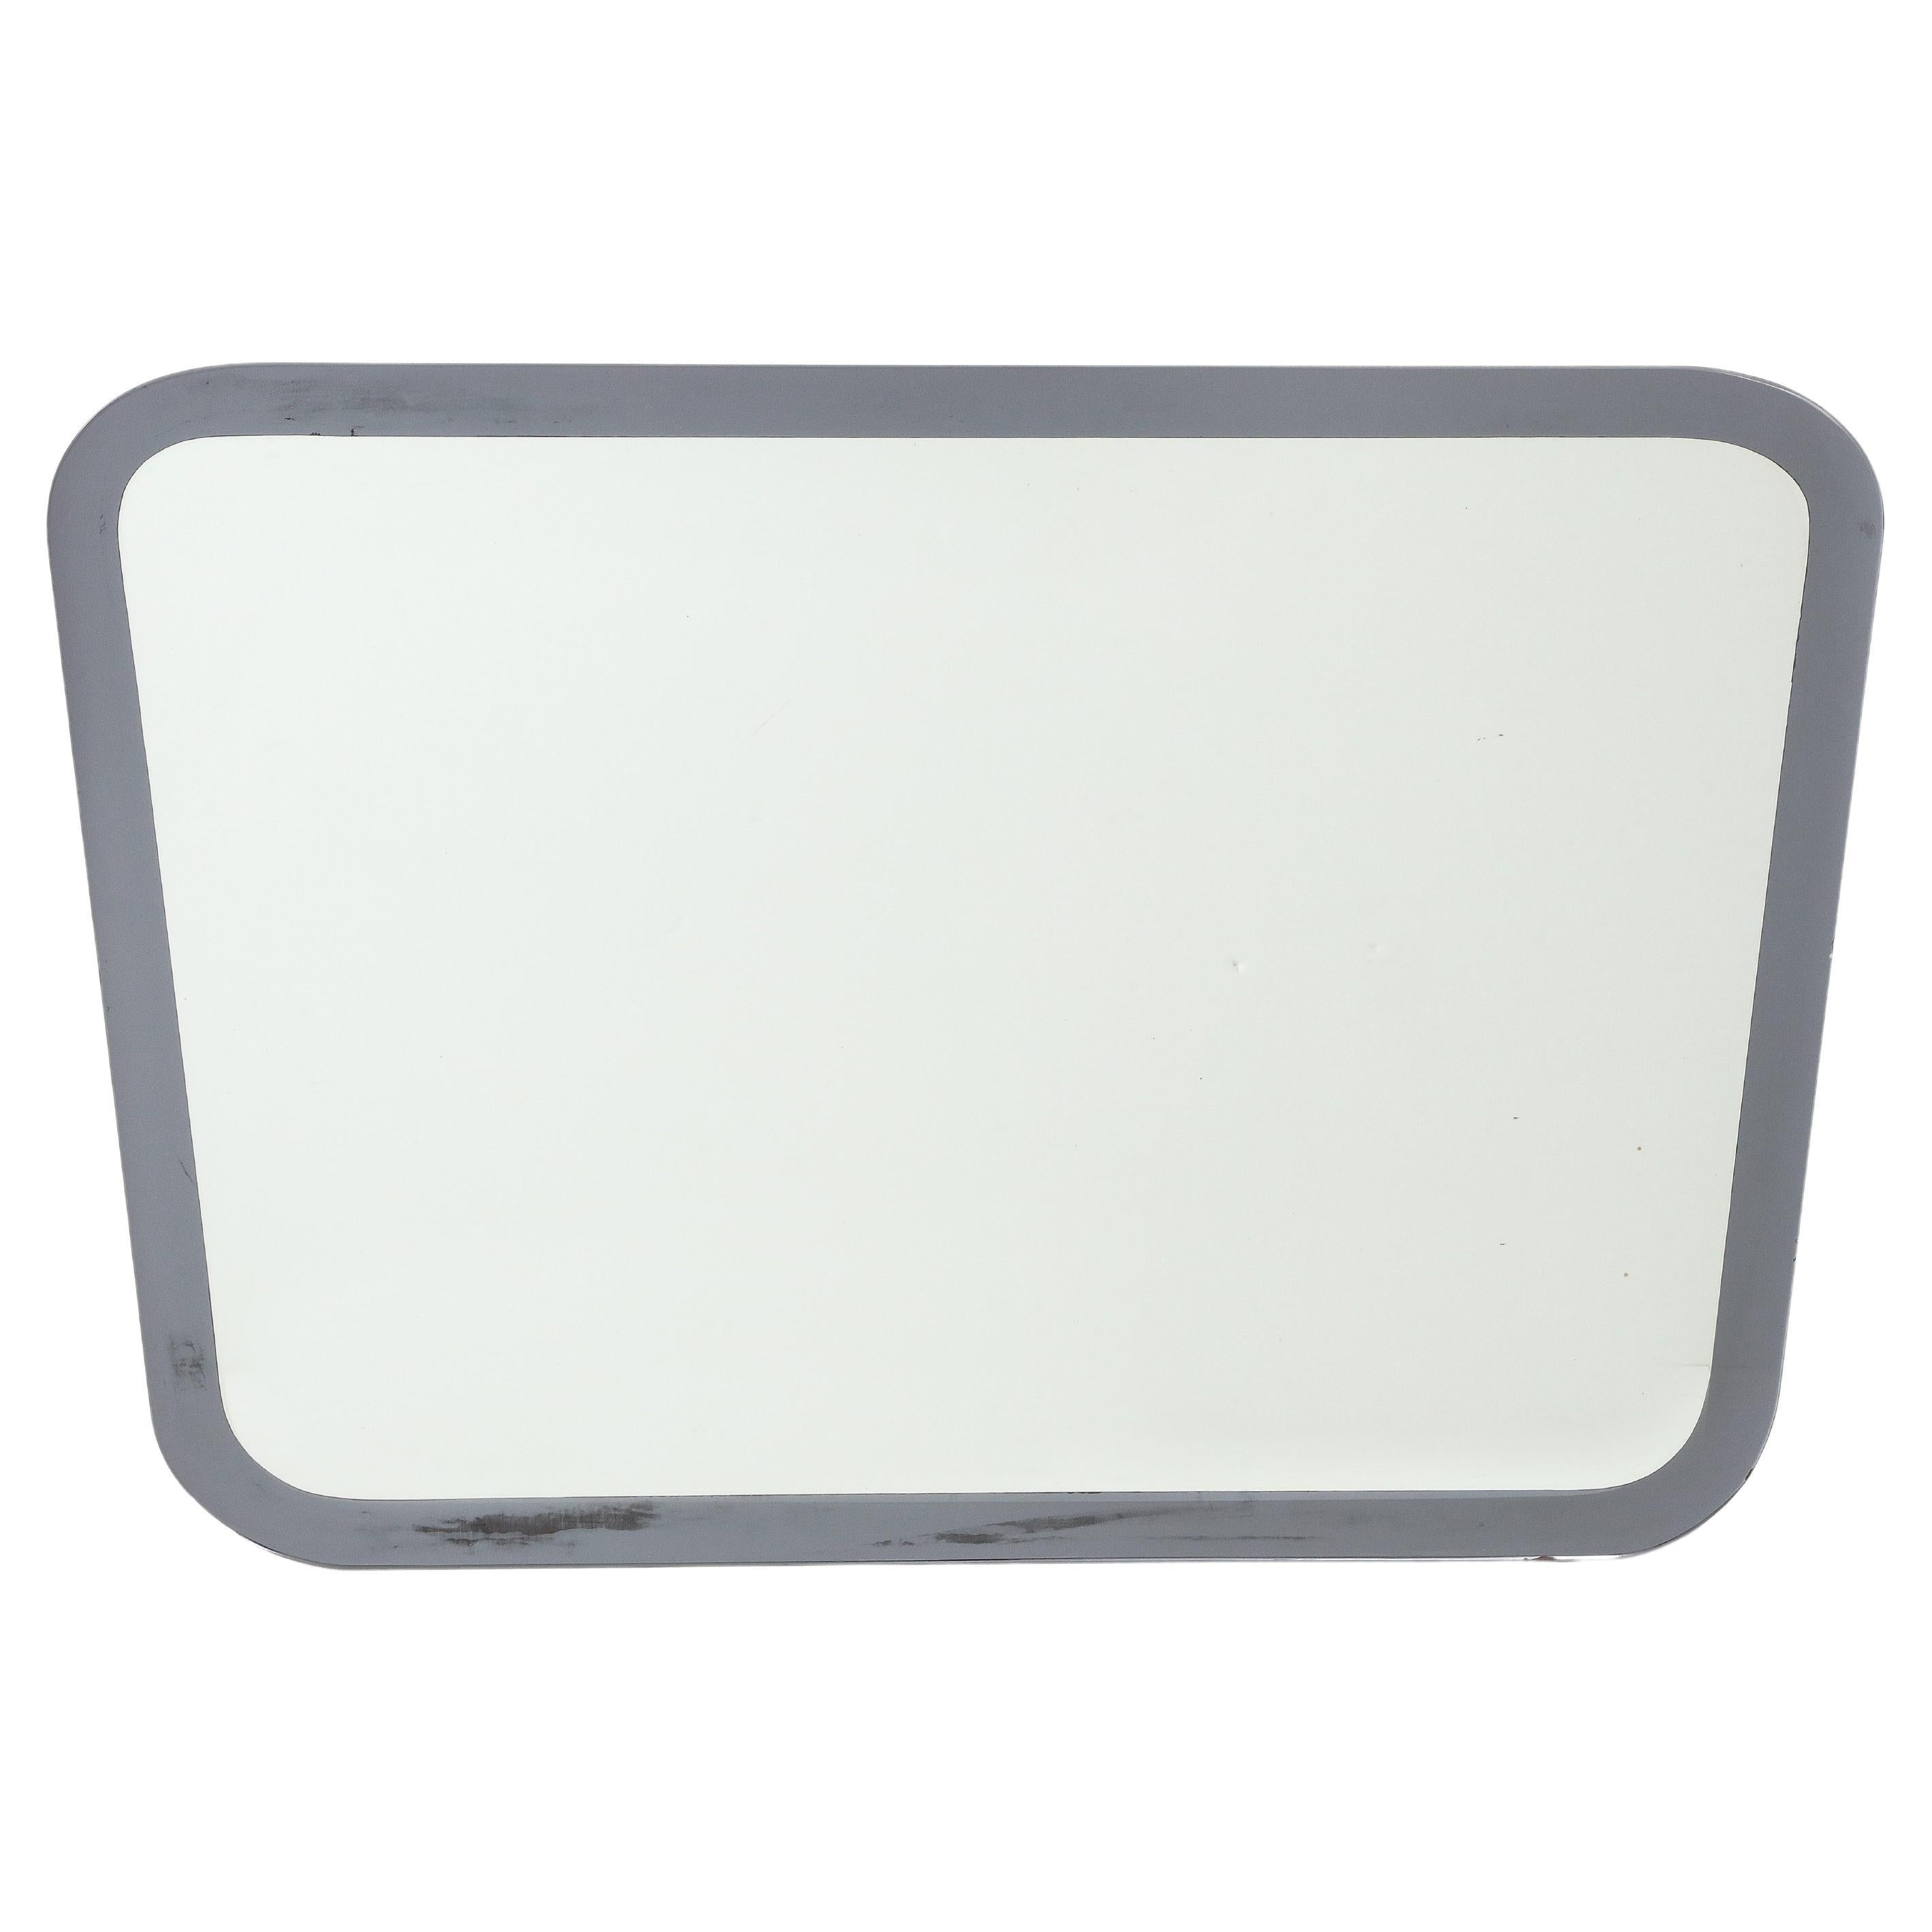 Metalvetro Siena Galvorame Wall Mirror, Italy, dated 1967  For Sale